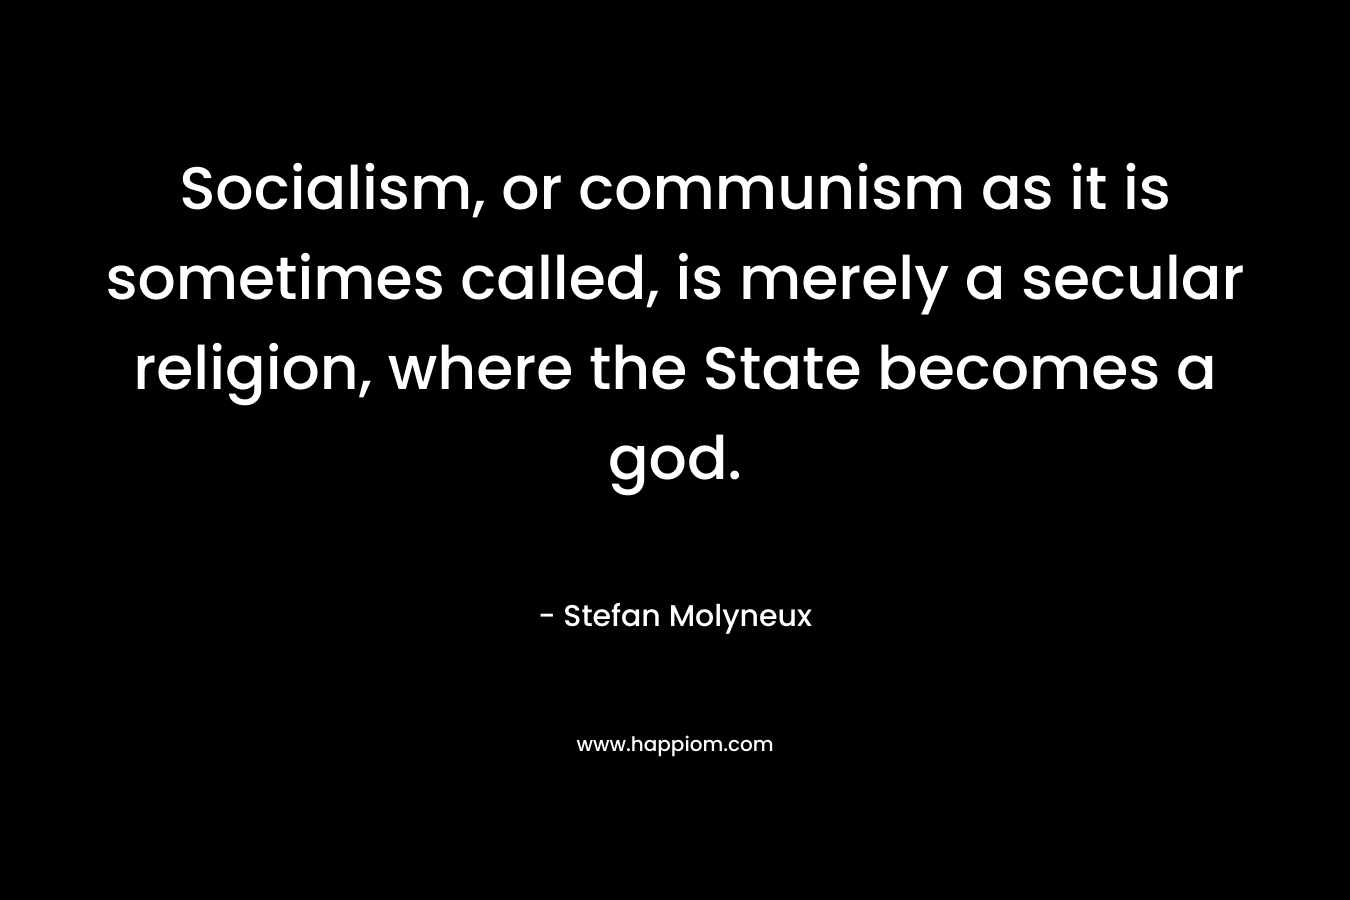 Socialism, or communism as it is sometimes called, is merely a secular religion, where the State becomes a god.